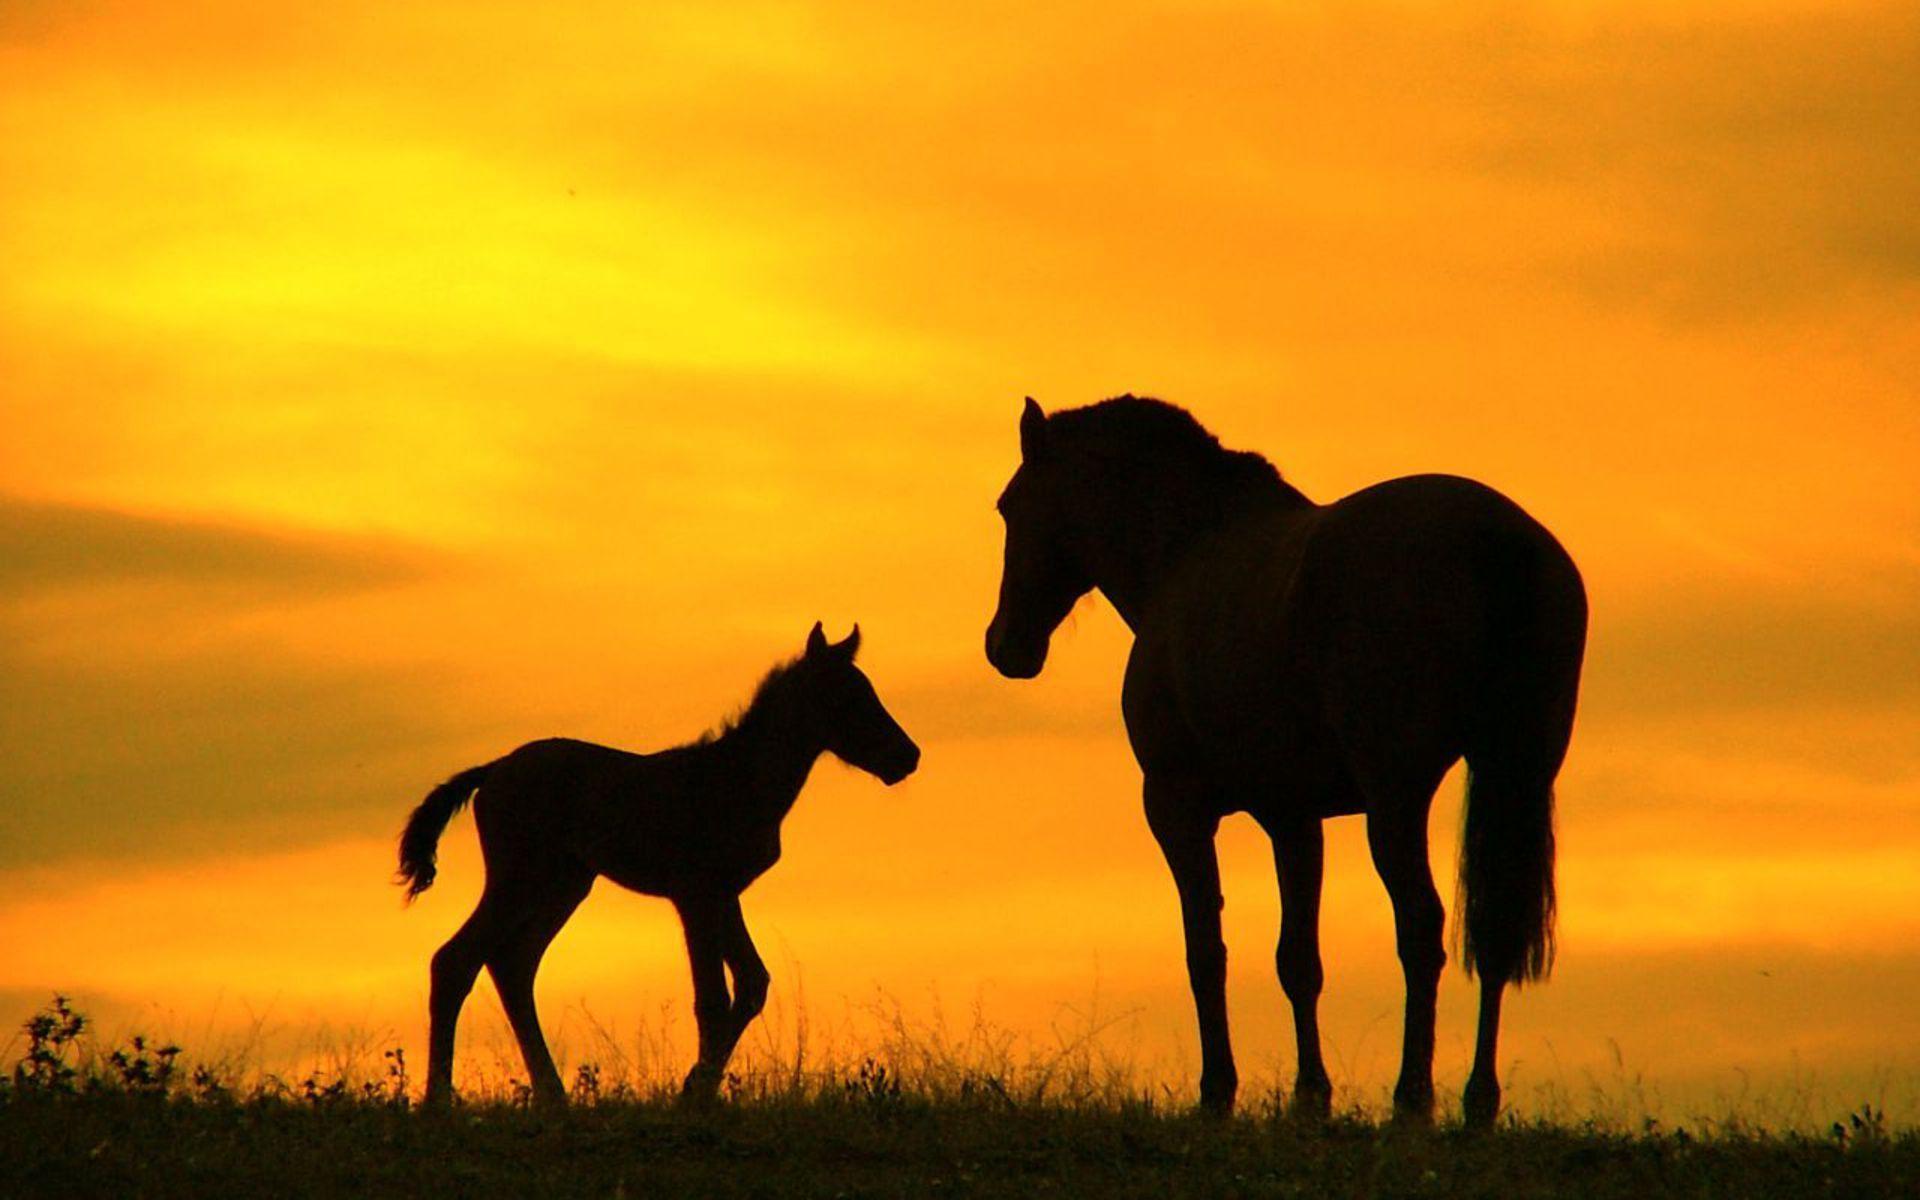 Horses Wallpaper Blog Archive Big And Small Horse Silhouette